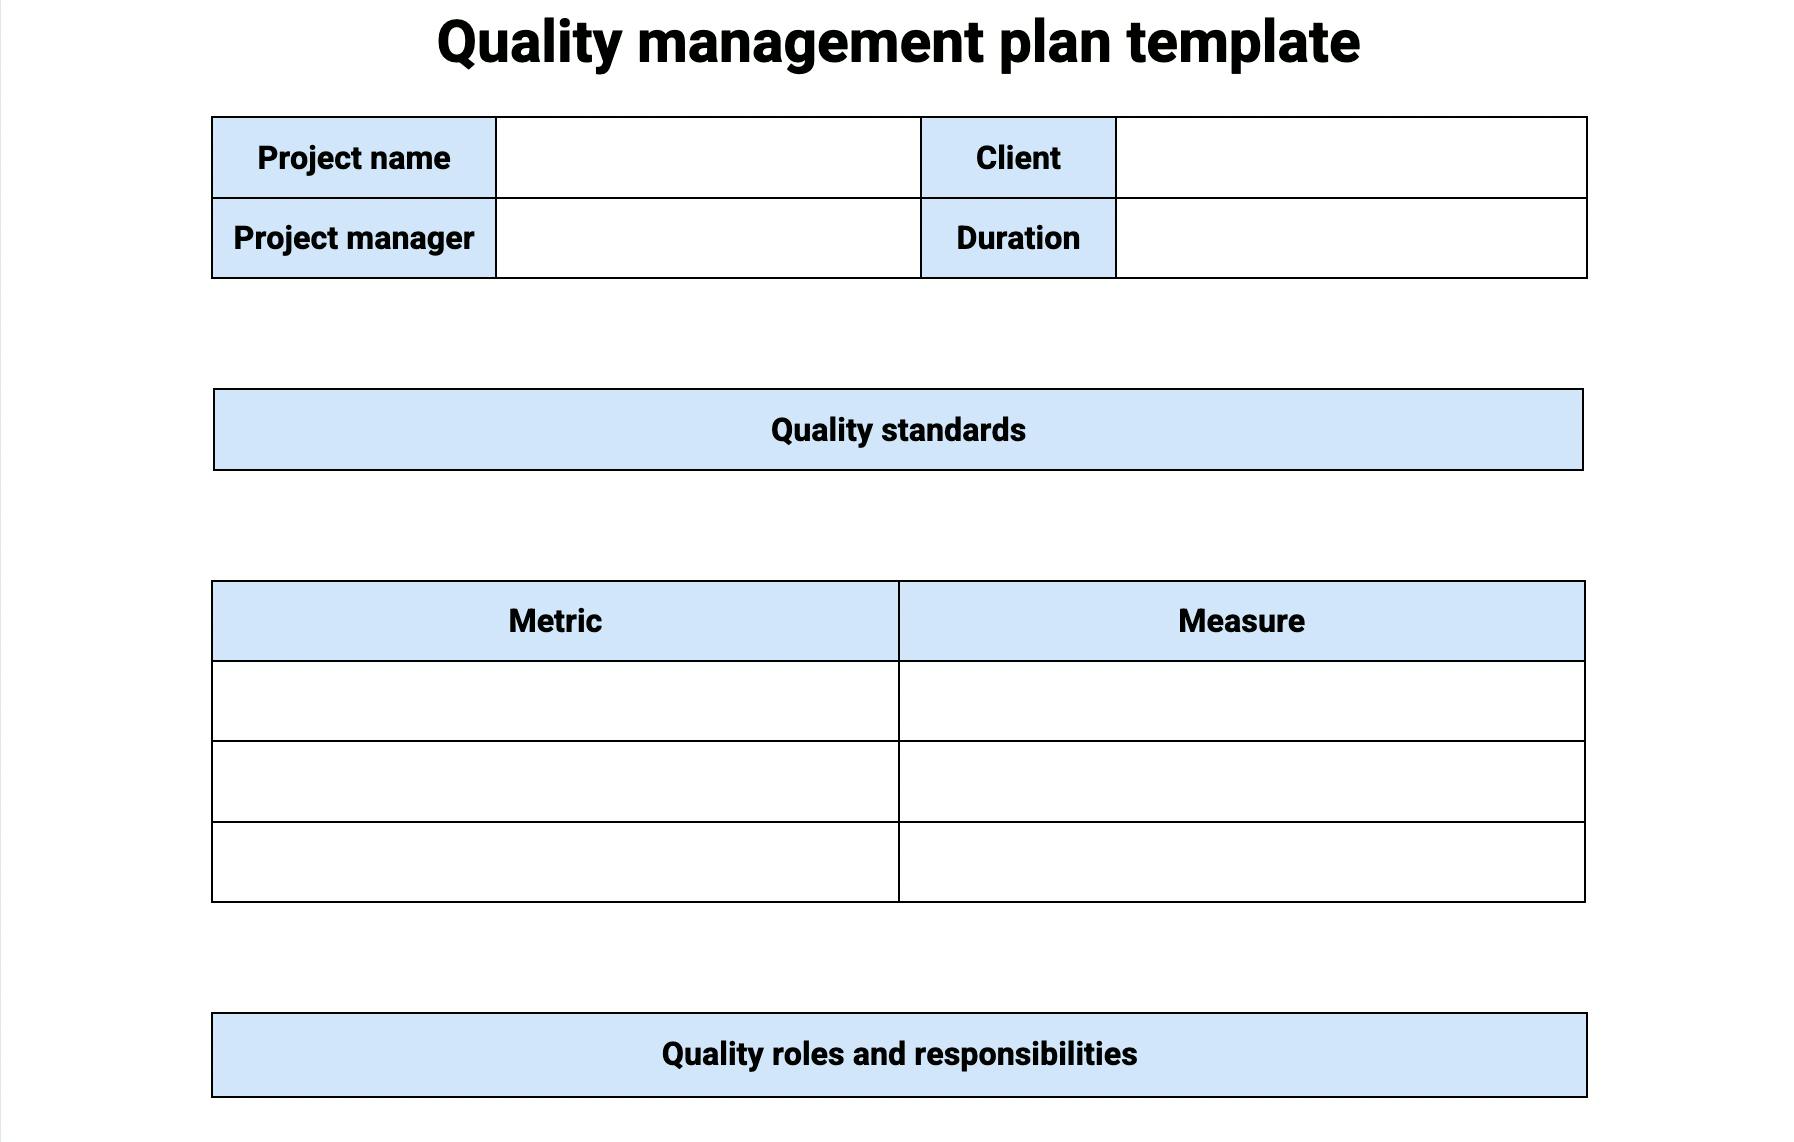 Quality management plan template